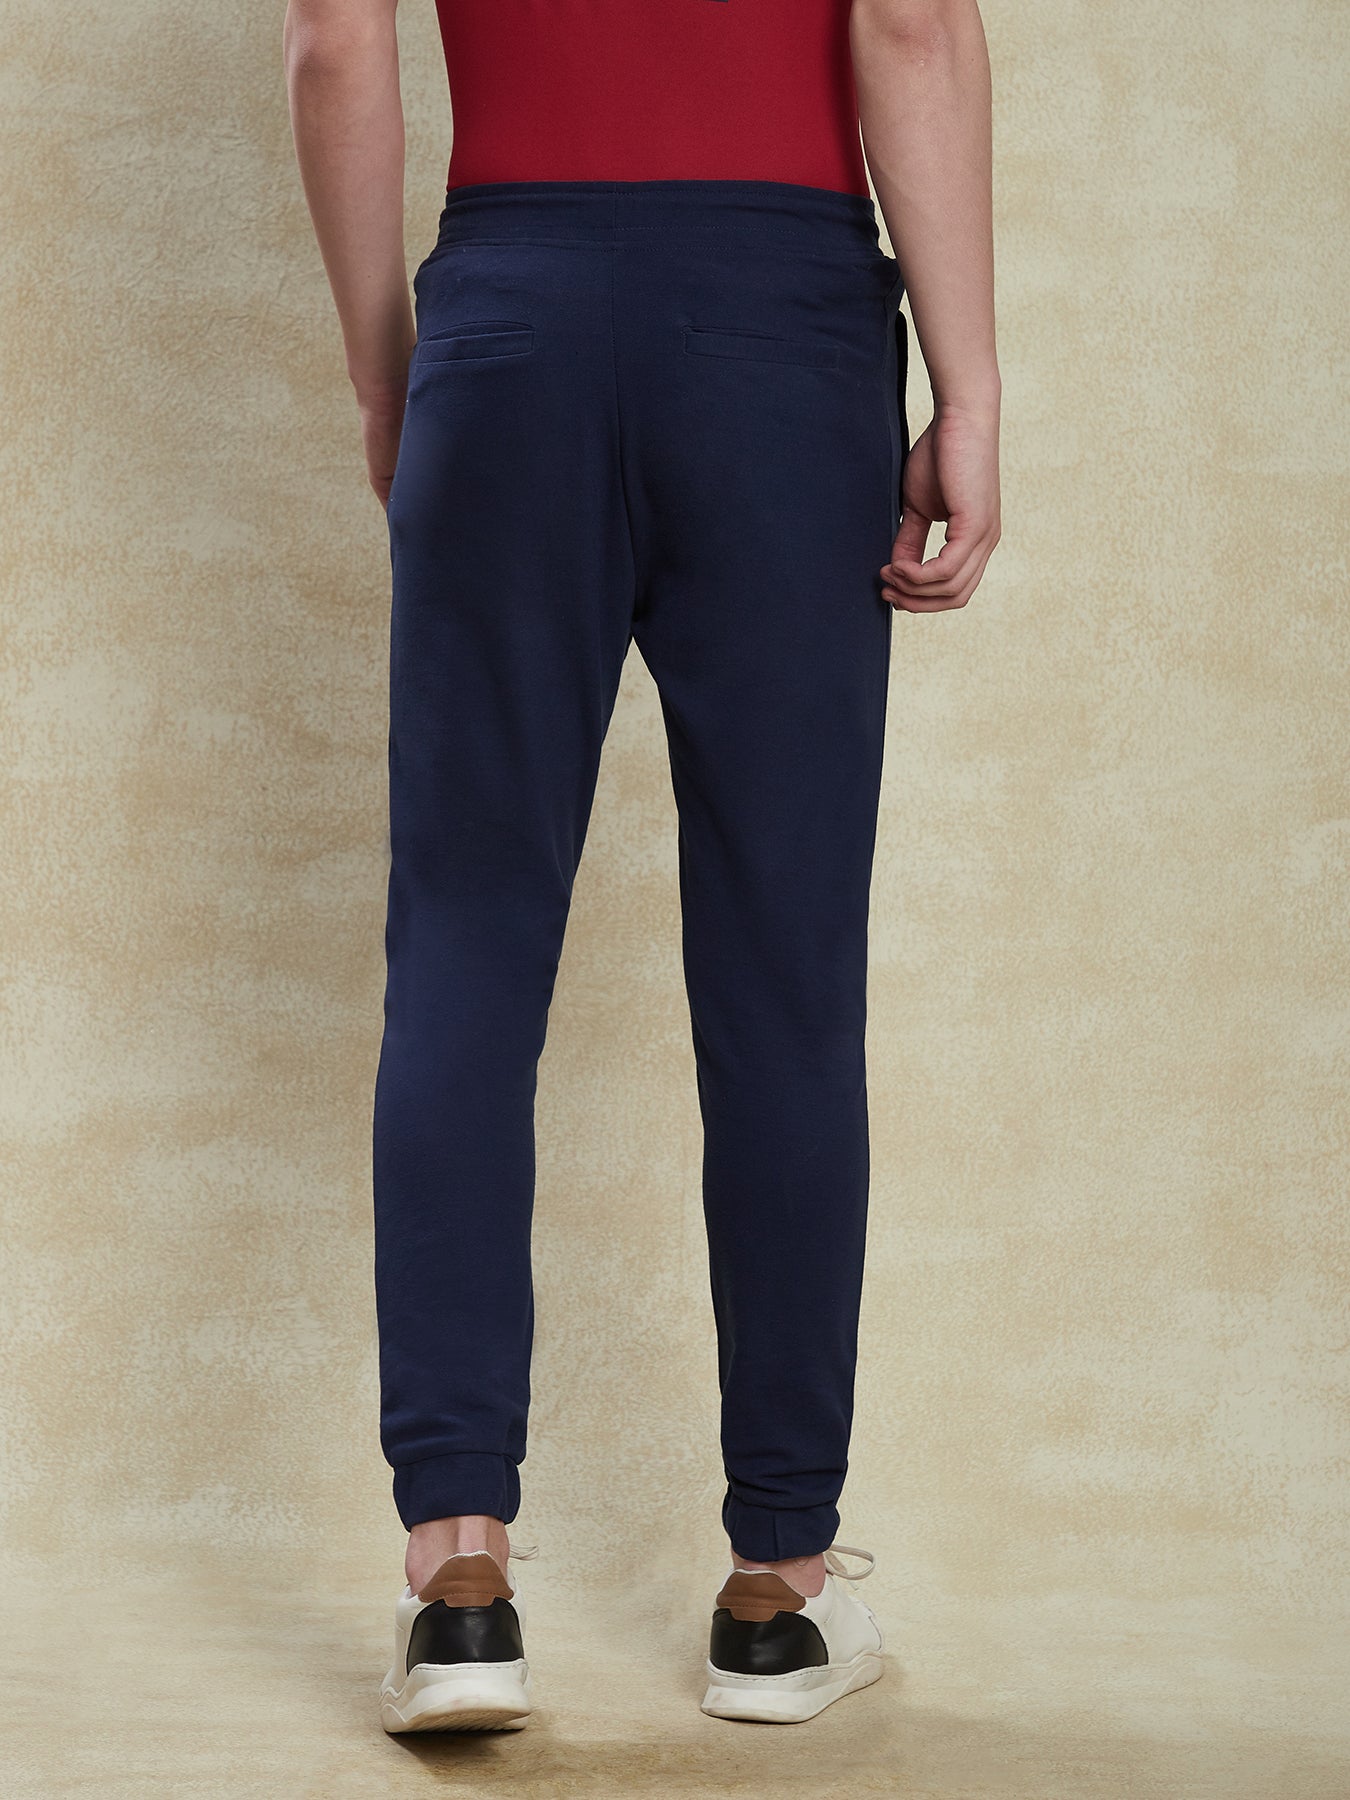 Knitted Navy Blue Plain Jogger Active Jogger